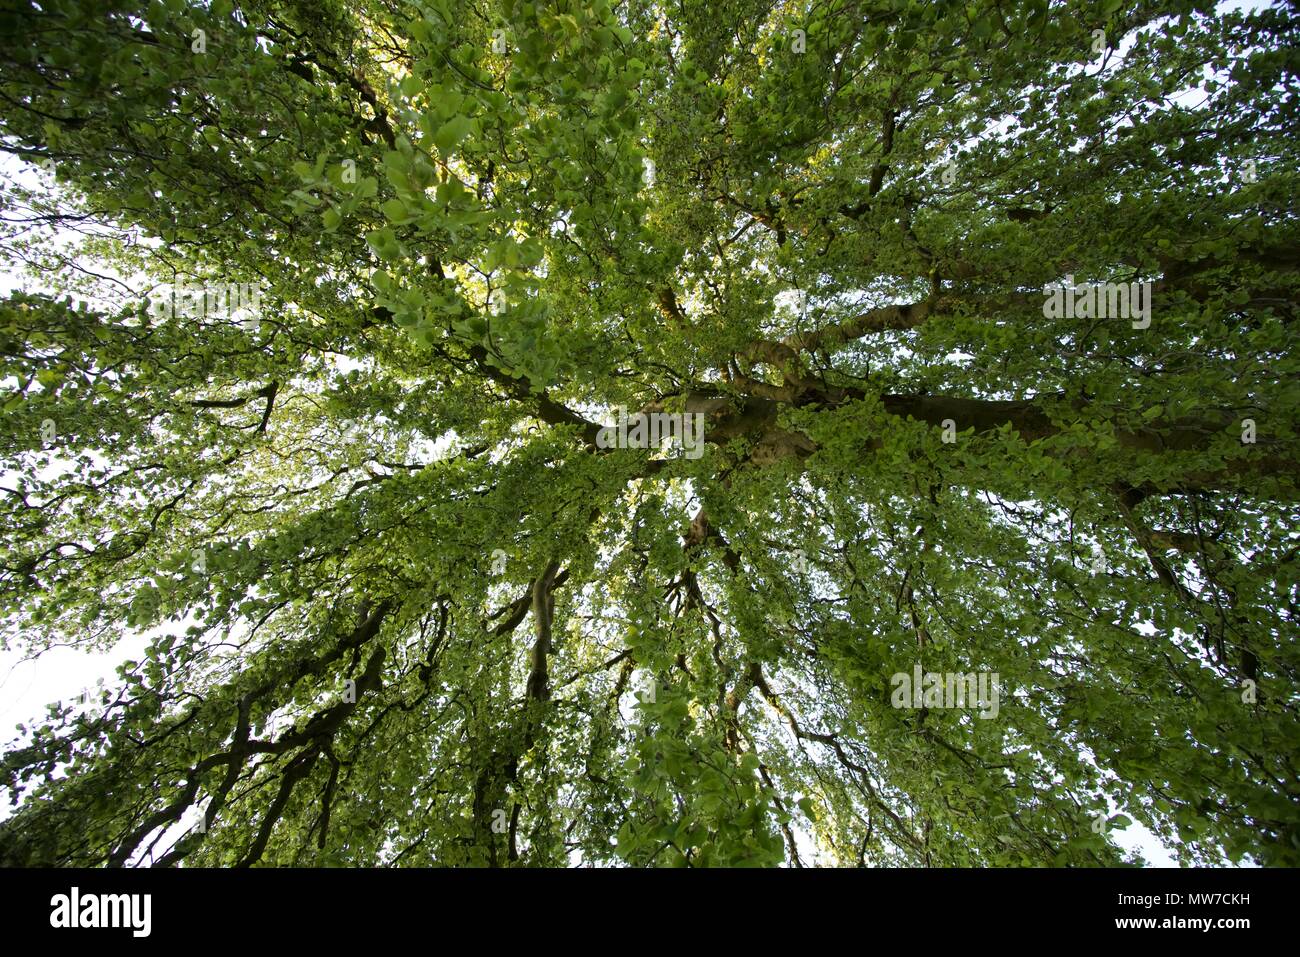 Weeping Beech (Fagus sylvatica 'Pendula'): a view up into the trailing branches of a large Weeping Beech tree Stock Photo